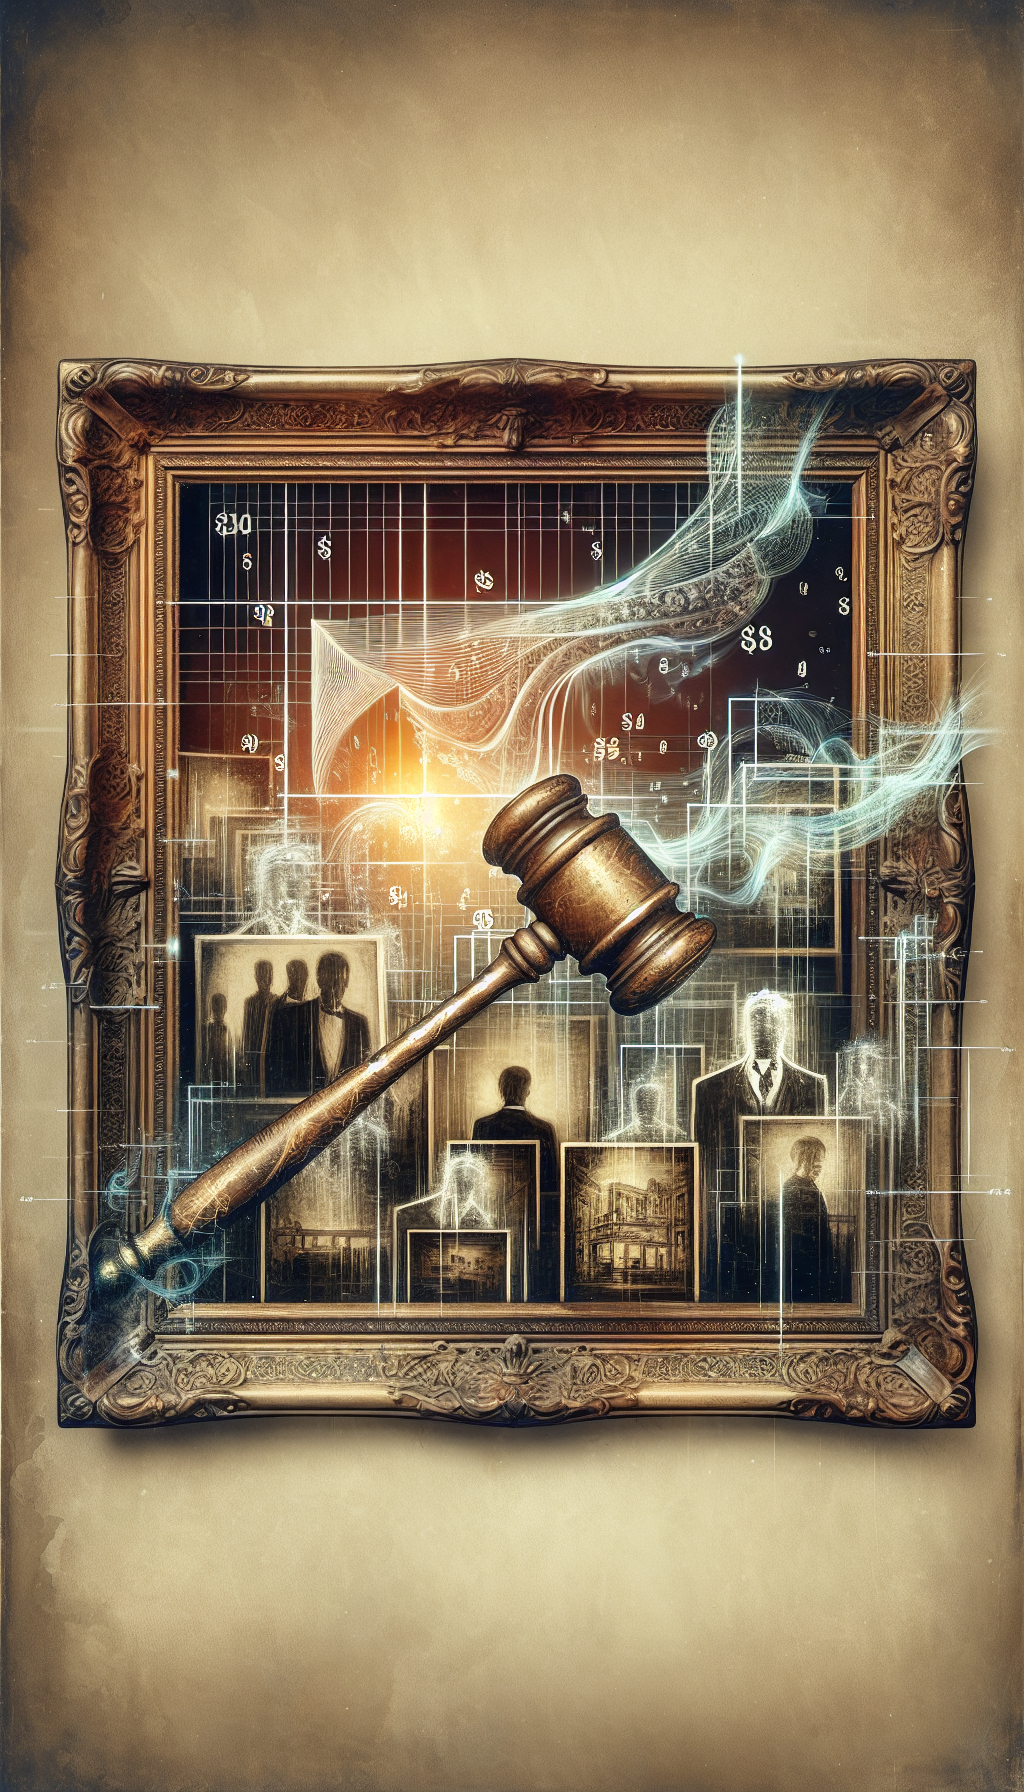 An artfully layered image depicts an antique frame enclosing an auction hammer, while ethereal lines connect to historical documents and faded photographs in the background. Ghostly silhouettes of past owners gaze towards a glowing certificate of authenticity, emphasizing the artwork's heritage, as its escalating auction value is illustrated by ascending currency symbols subtly woven into the ornate frame's gilded patterns.